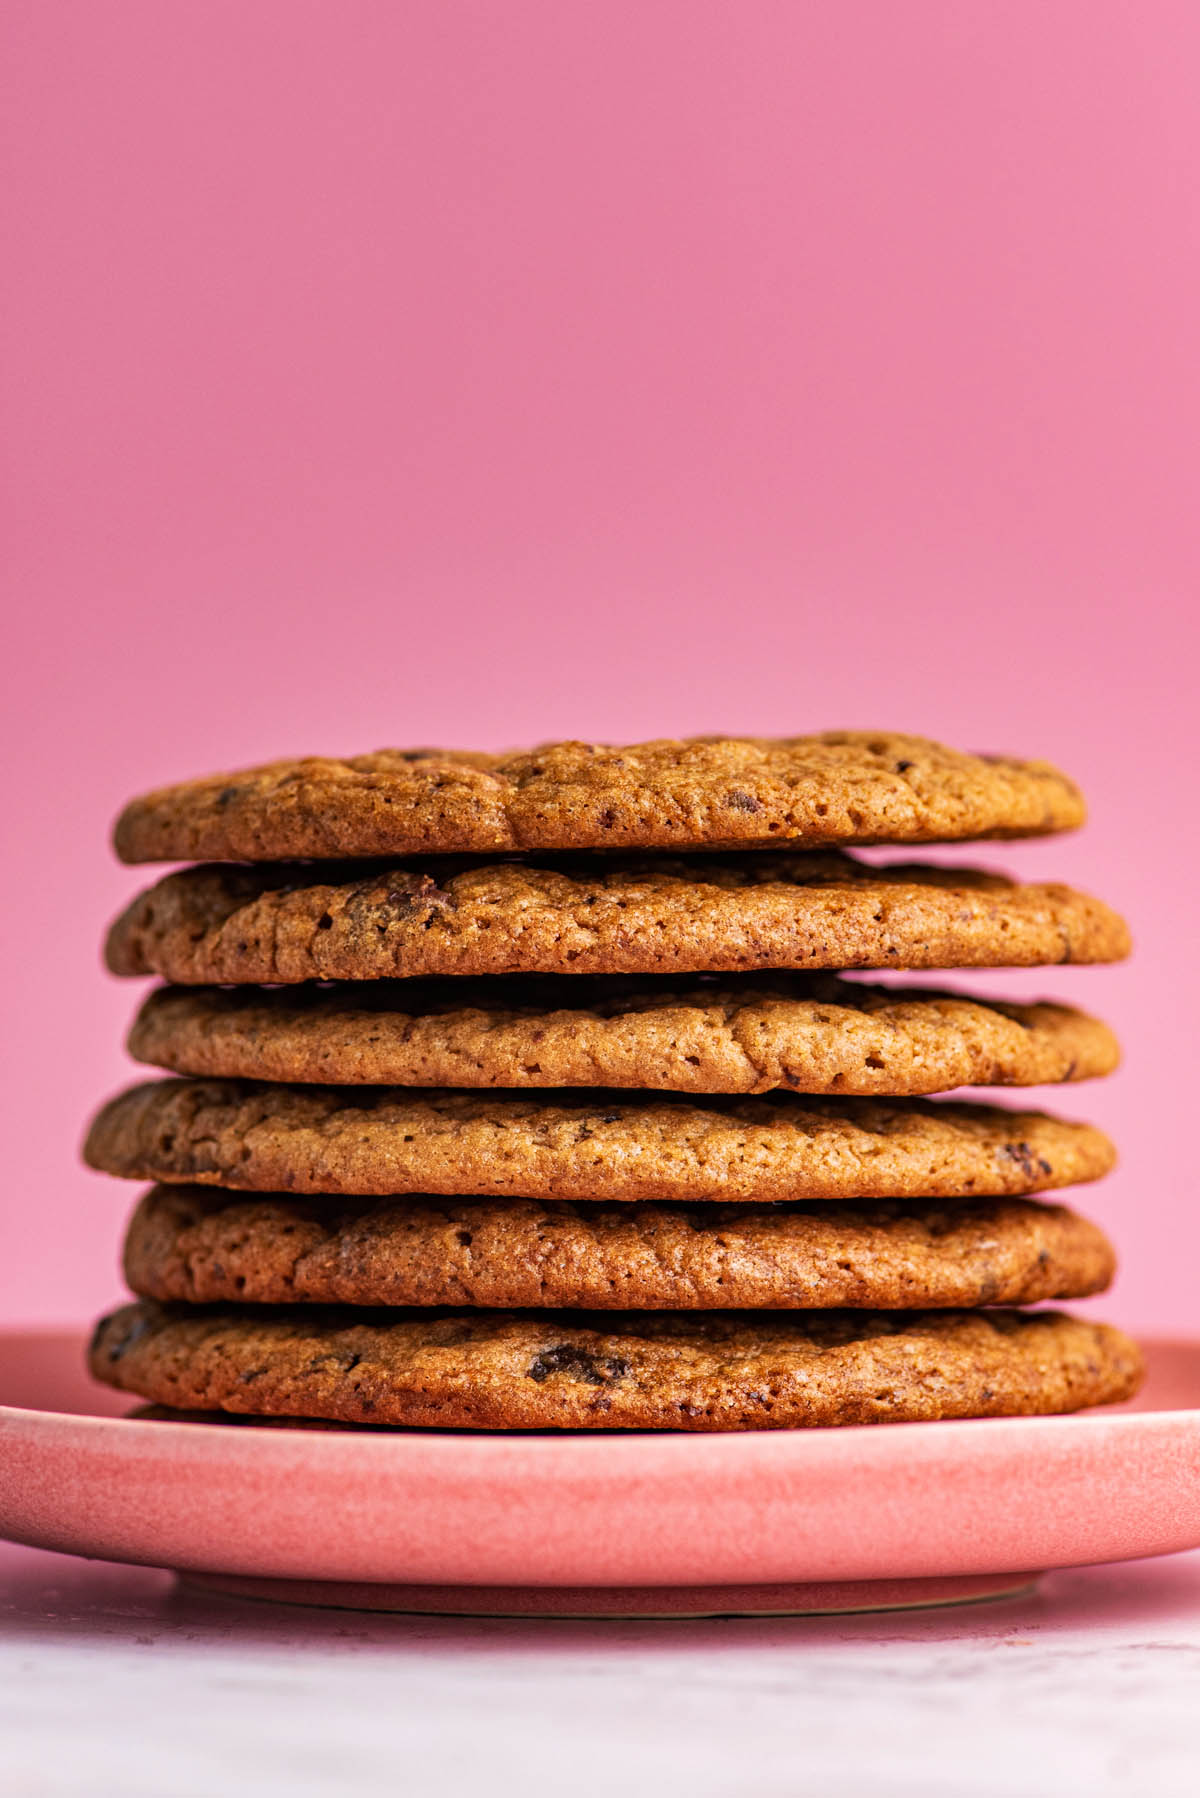 Stack of thin chocolate chunk cookies on a pink plate in front of a pink background.